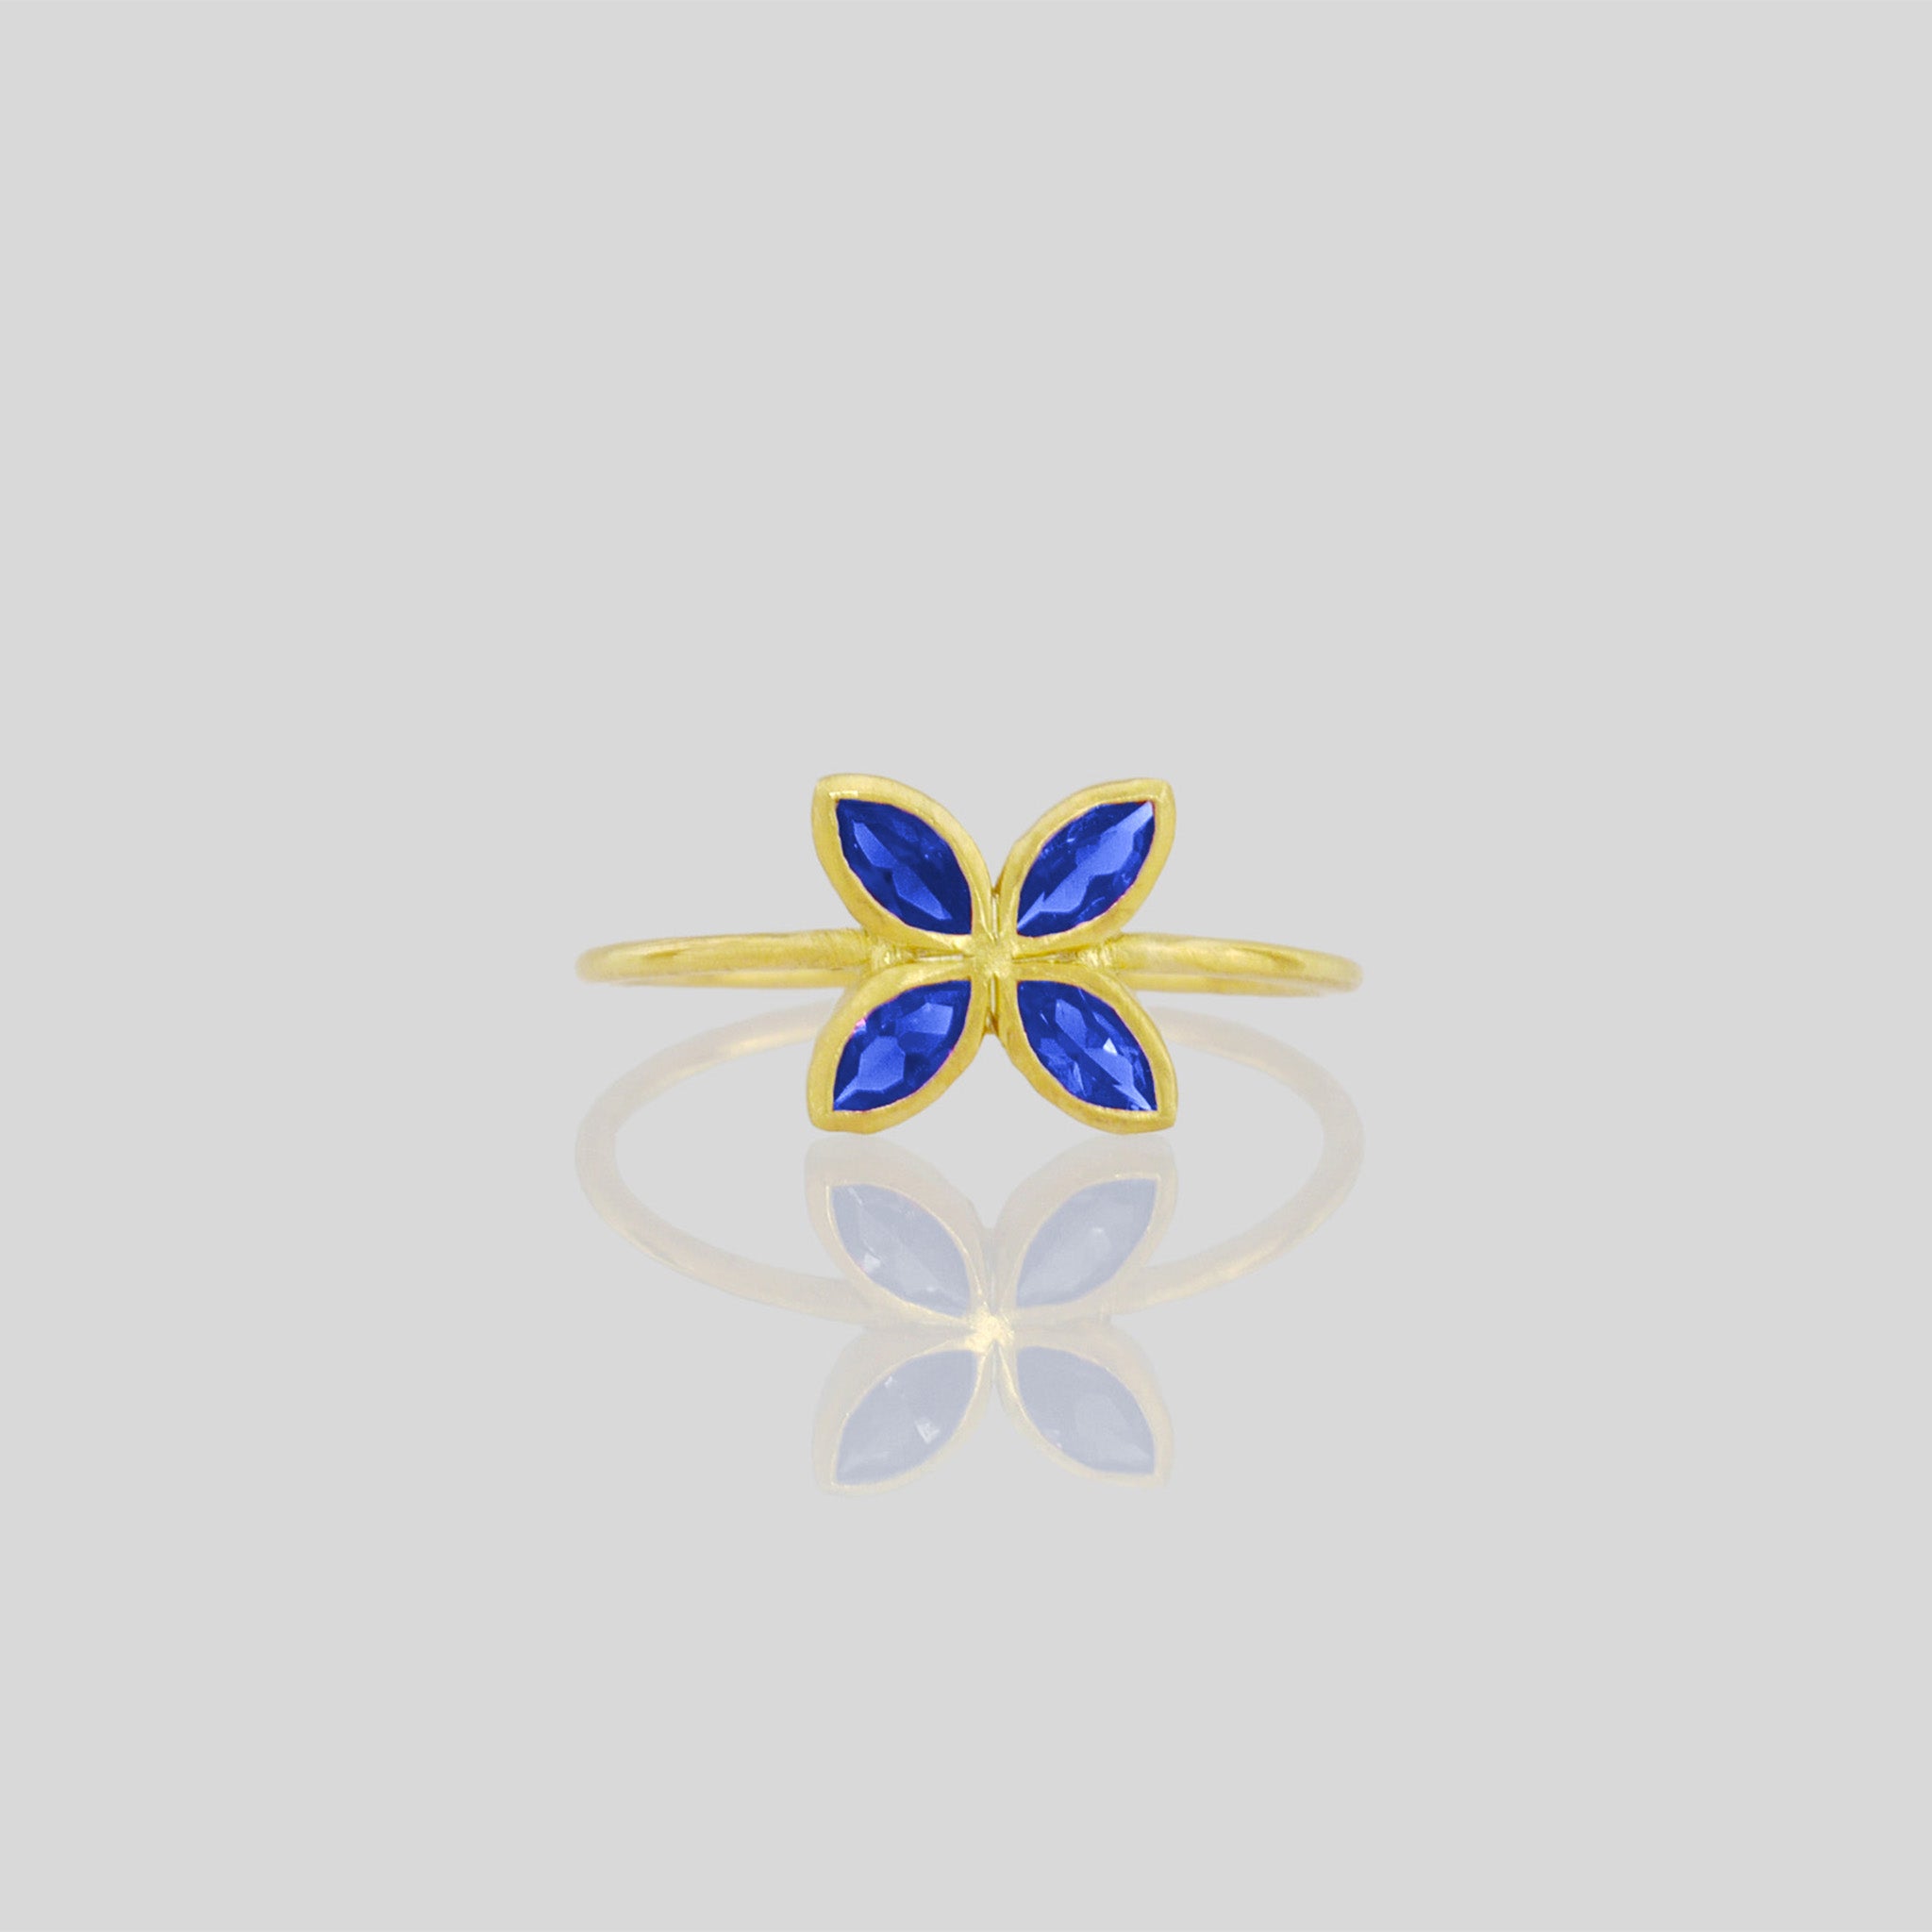 front view of Delicate Gold ring with Sapphire marquise in a flower-shaped design. Radiant and cheerful addition to any collection.